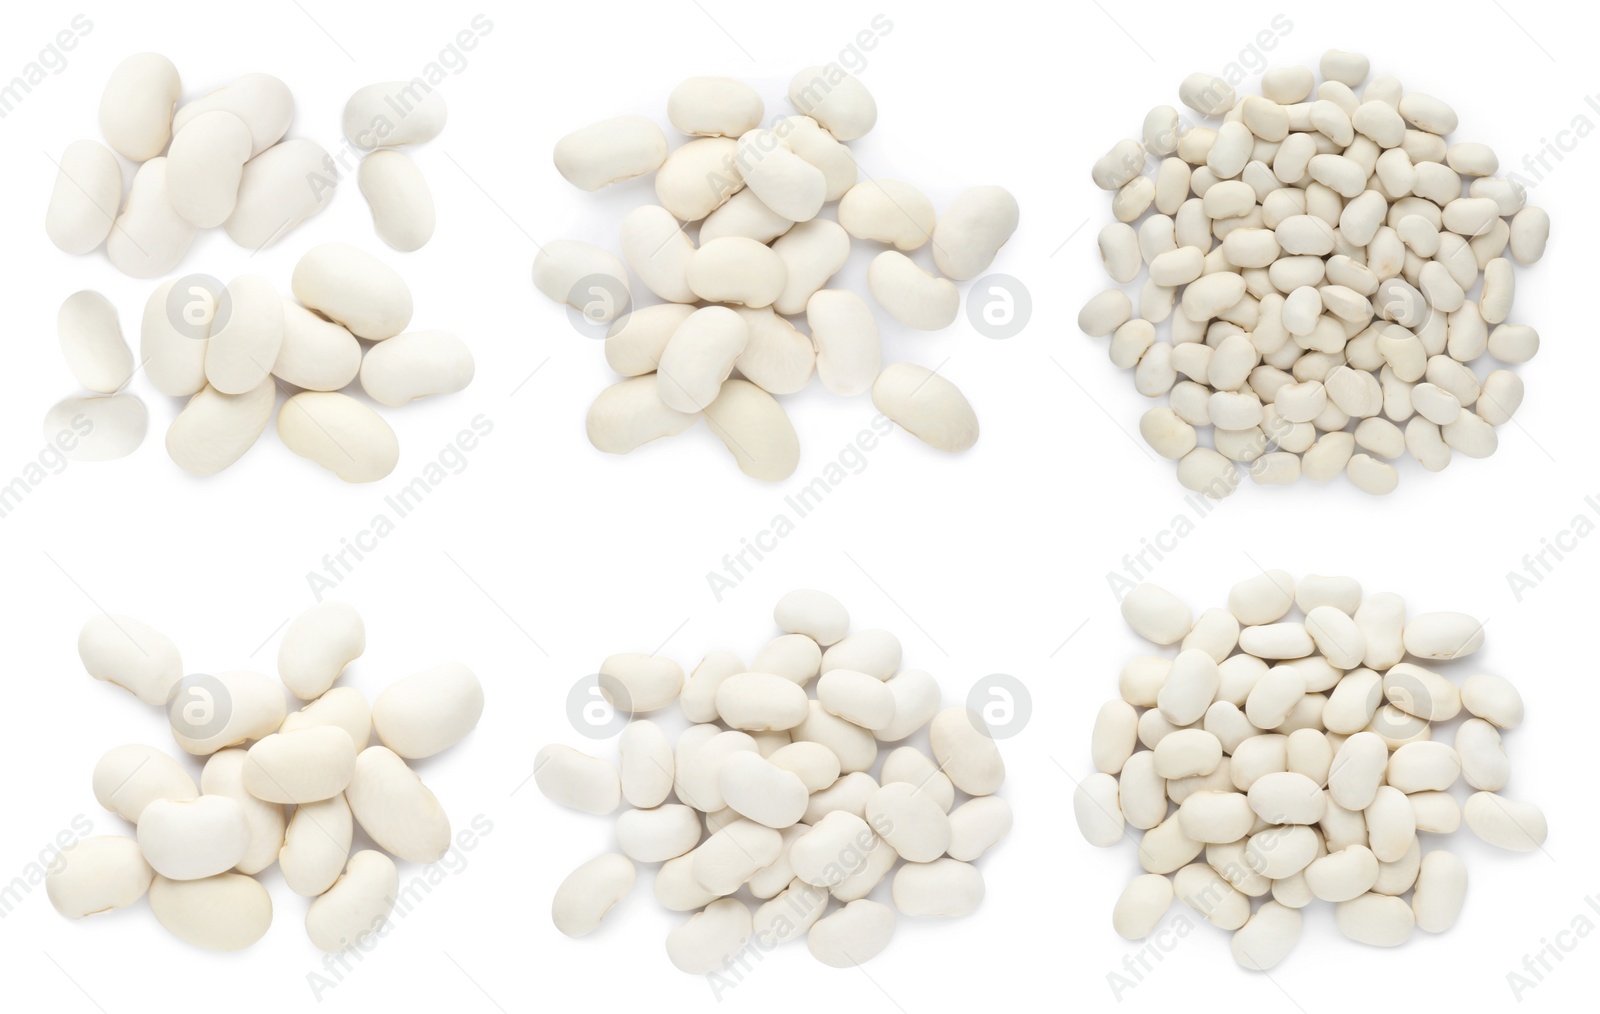 Image of Set with uncooked beans on white background, top view